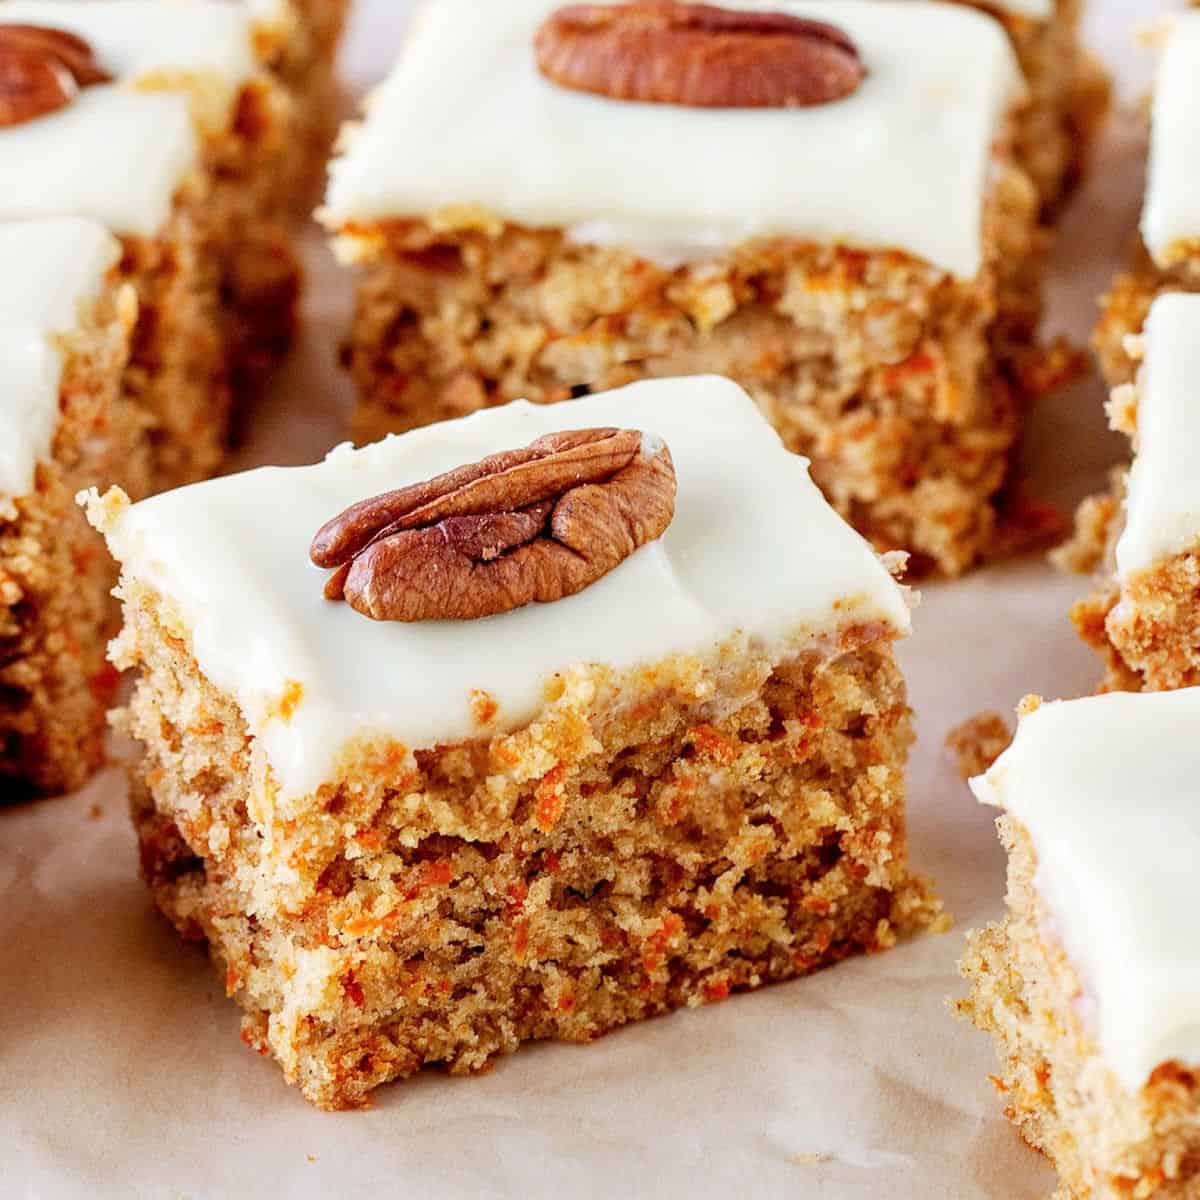 Squares of carrot cake with frosting and pecan, on white paper